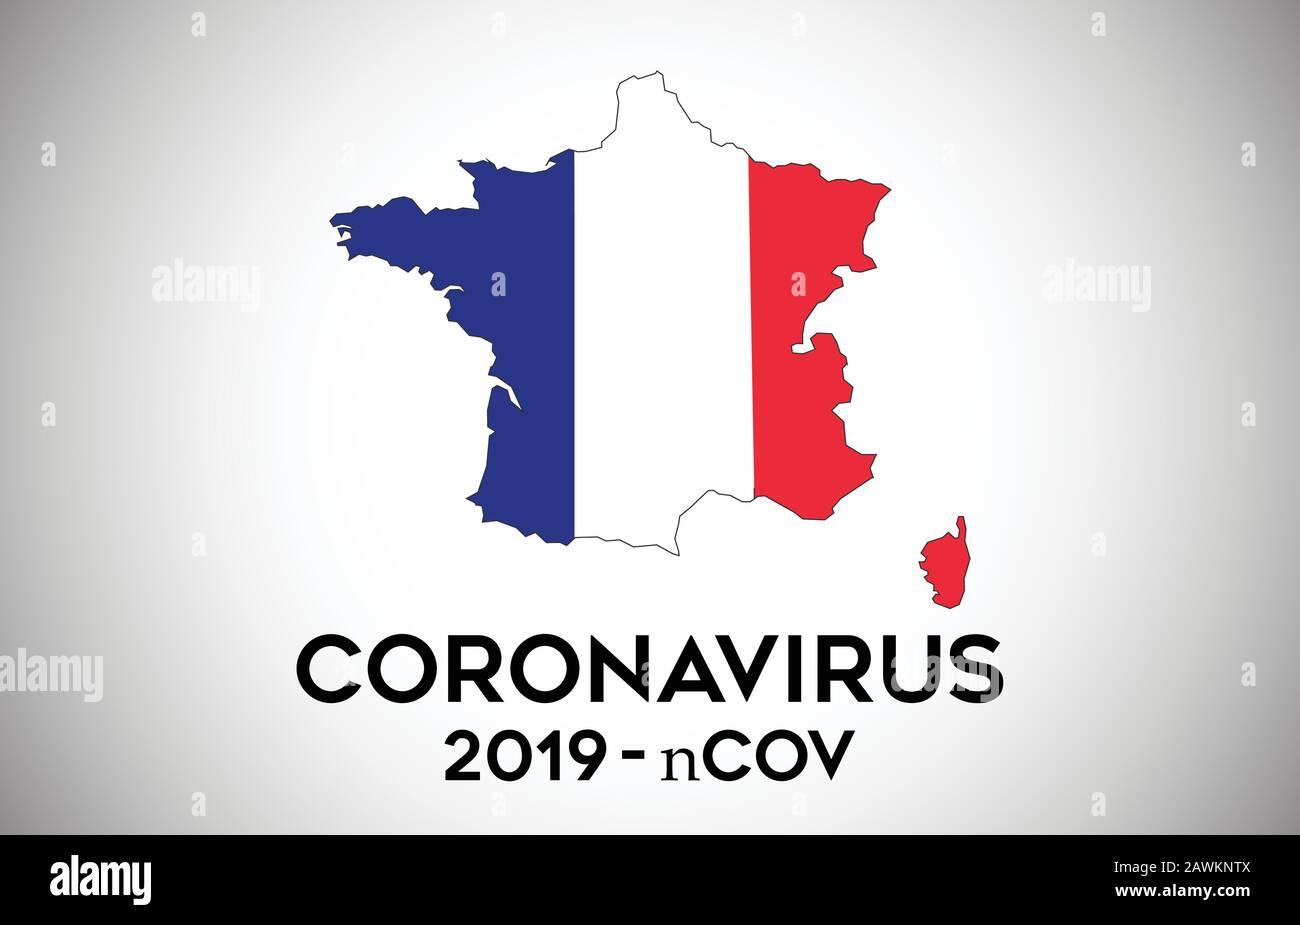 CoronaVirus in France and Country flag inside Country border Map Vector Design. 2019-nCoV with France map with national flag Vector Illustration. Stock Vector